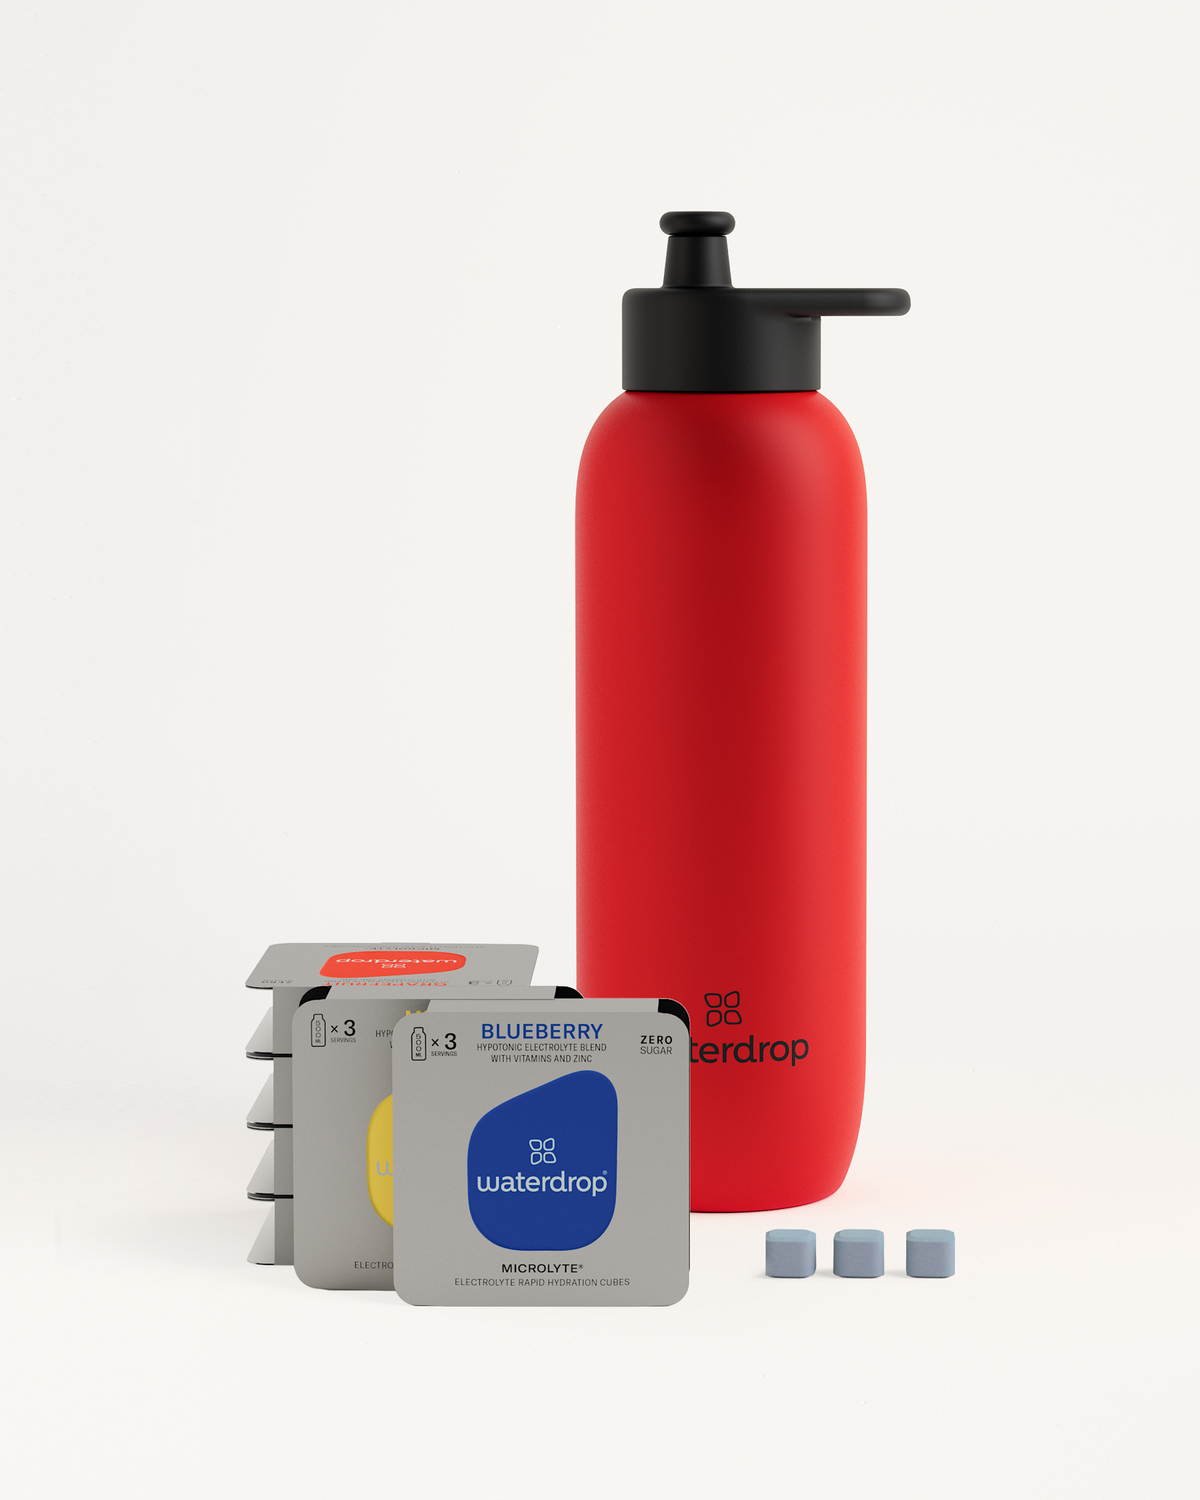 Extra lightweight bottle made of stainless steel